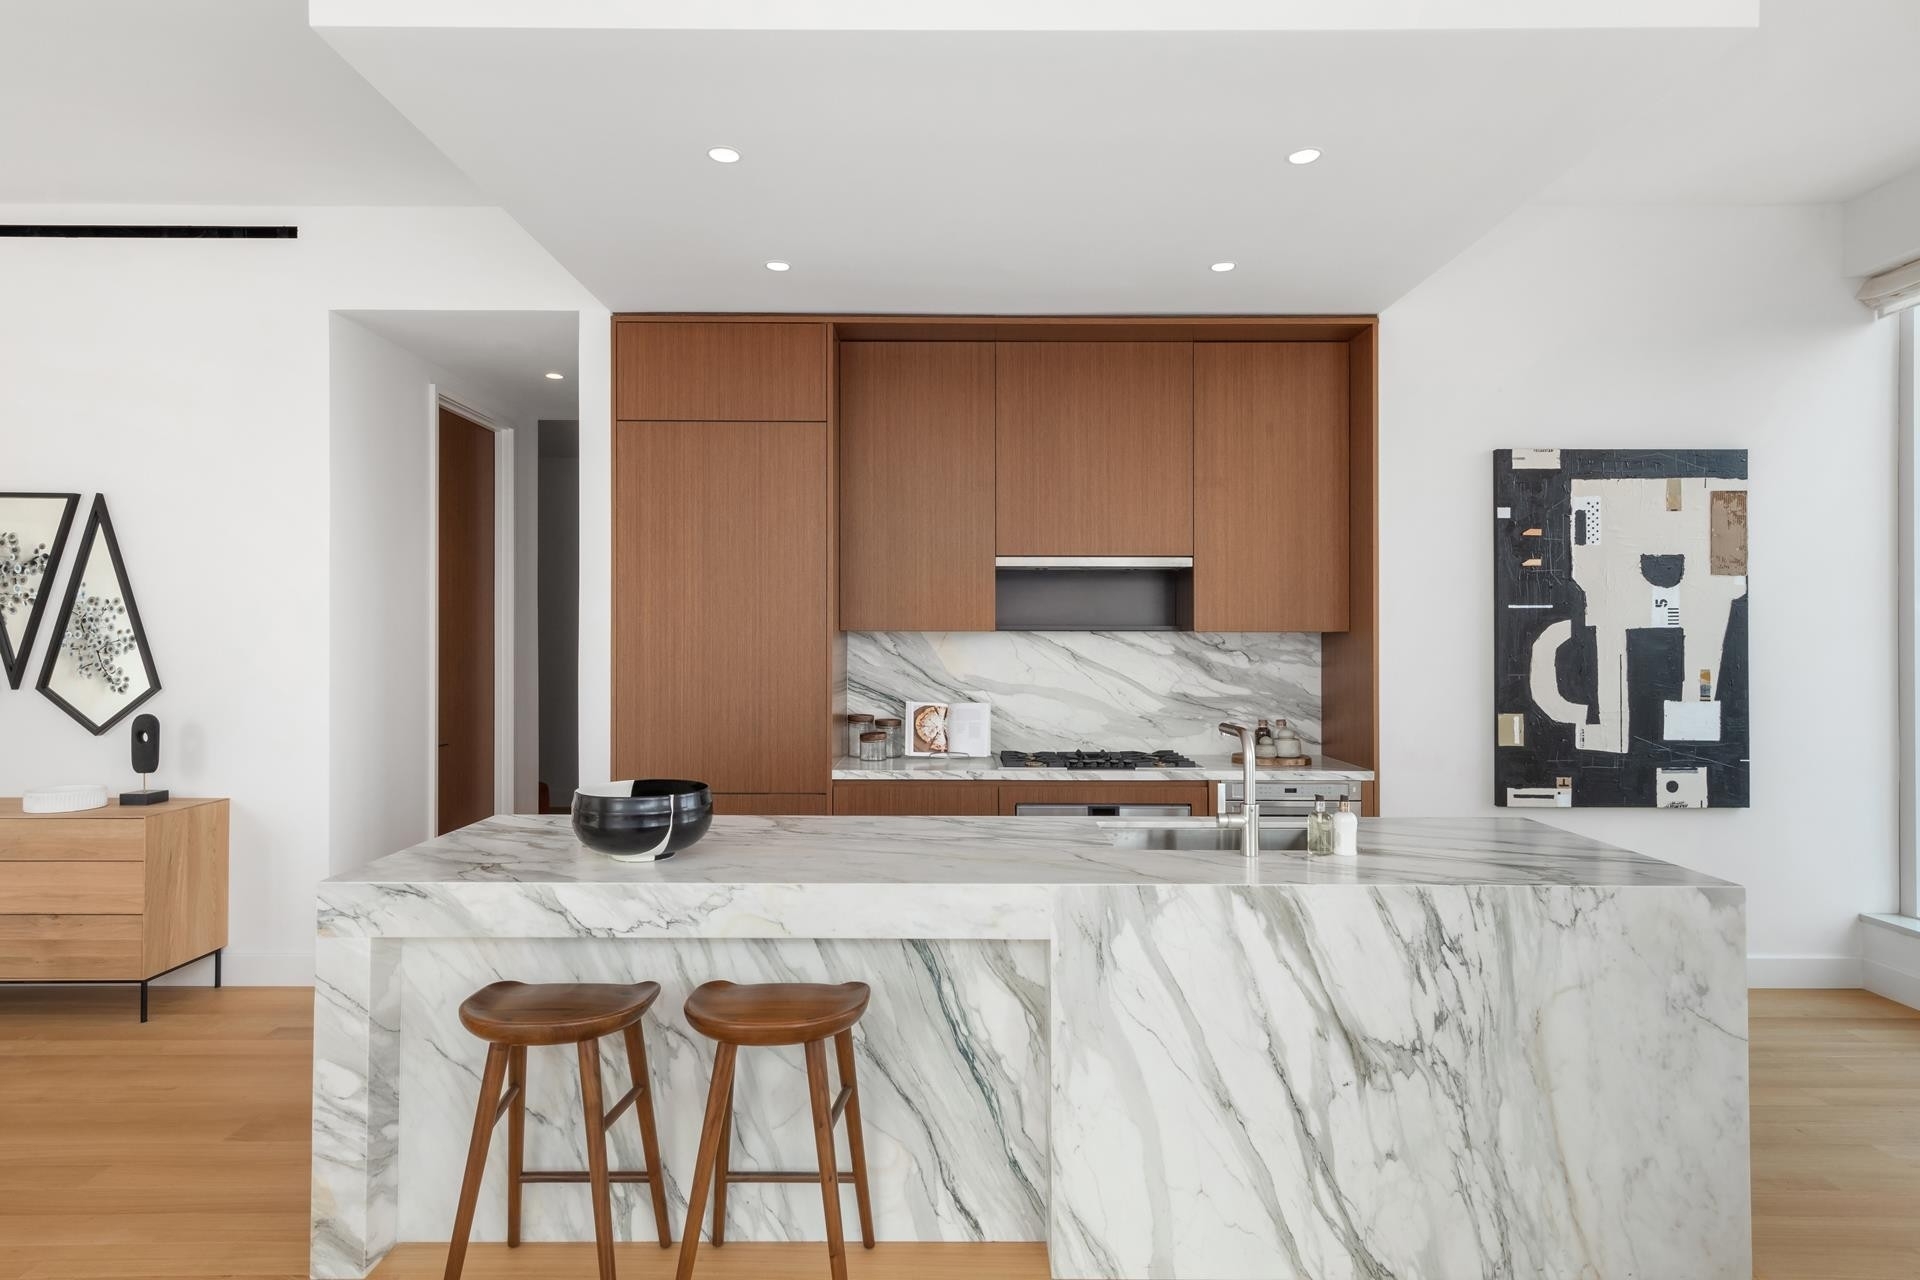 2. Condominiums for Sale at Madison House, 15 E 30TH ST, 31B NoMad, New York, New York 10016